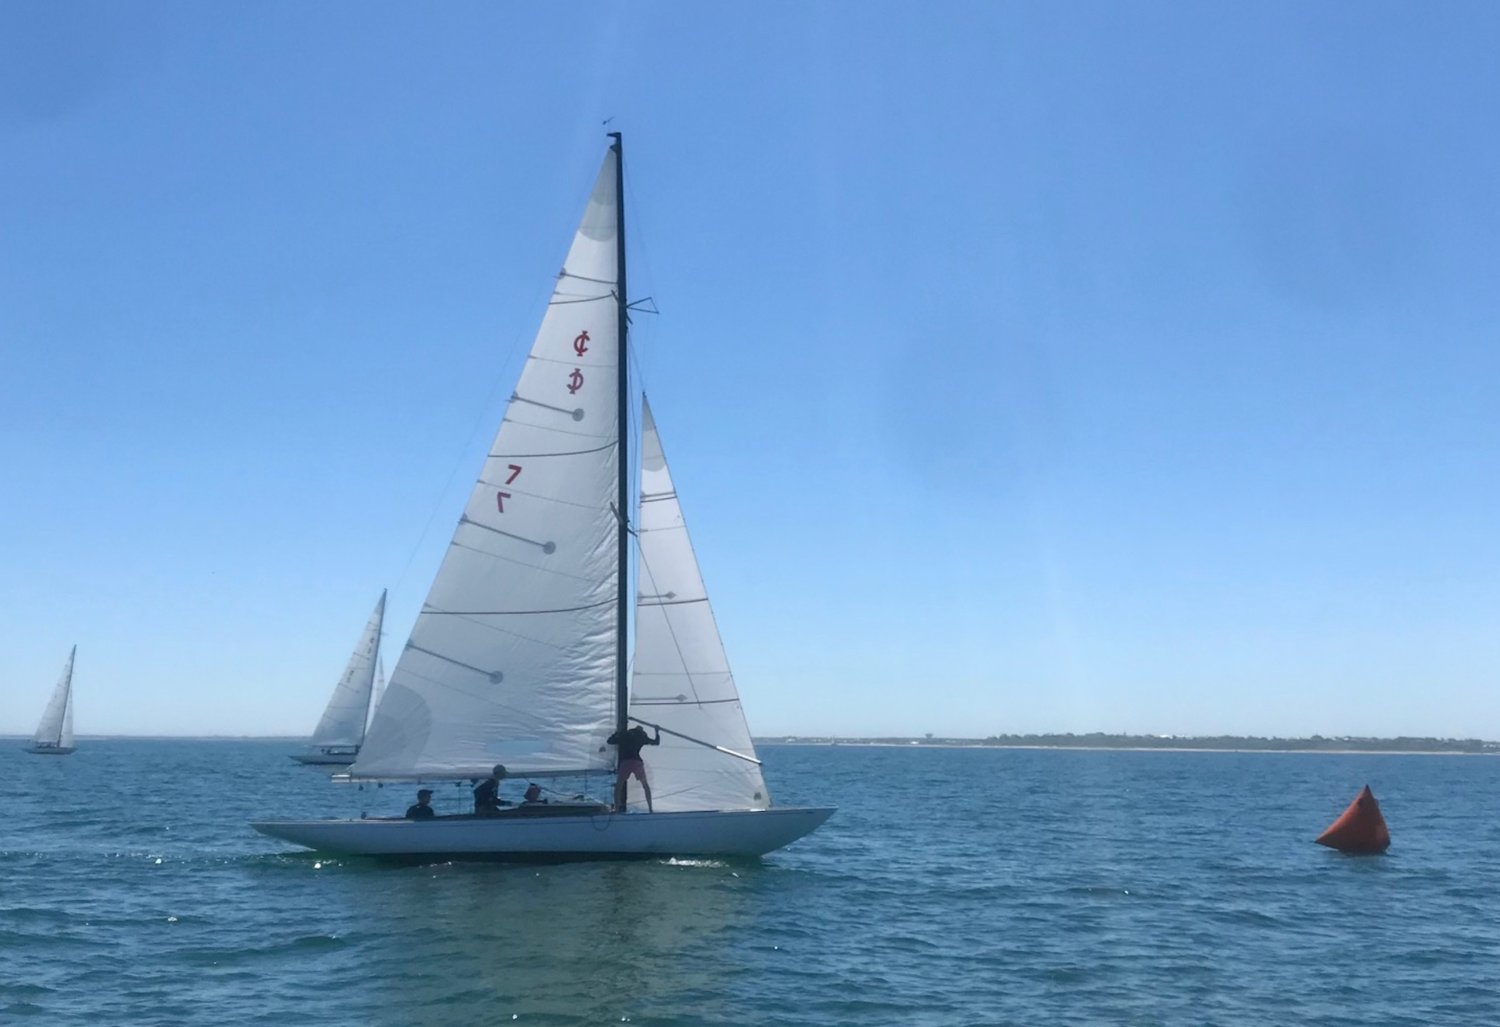 The Nantucket High School boat rounds the windward mark in the first race ahead of the fleet in Saturday’s Nantucket Yacht Club IOD June Invitational.